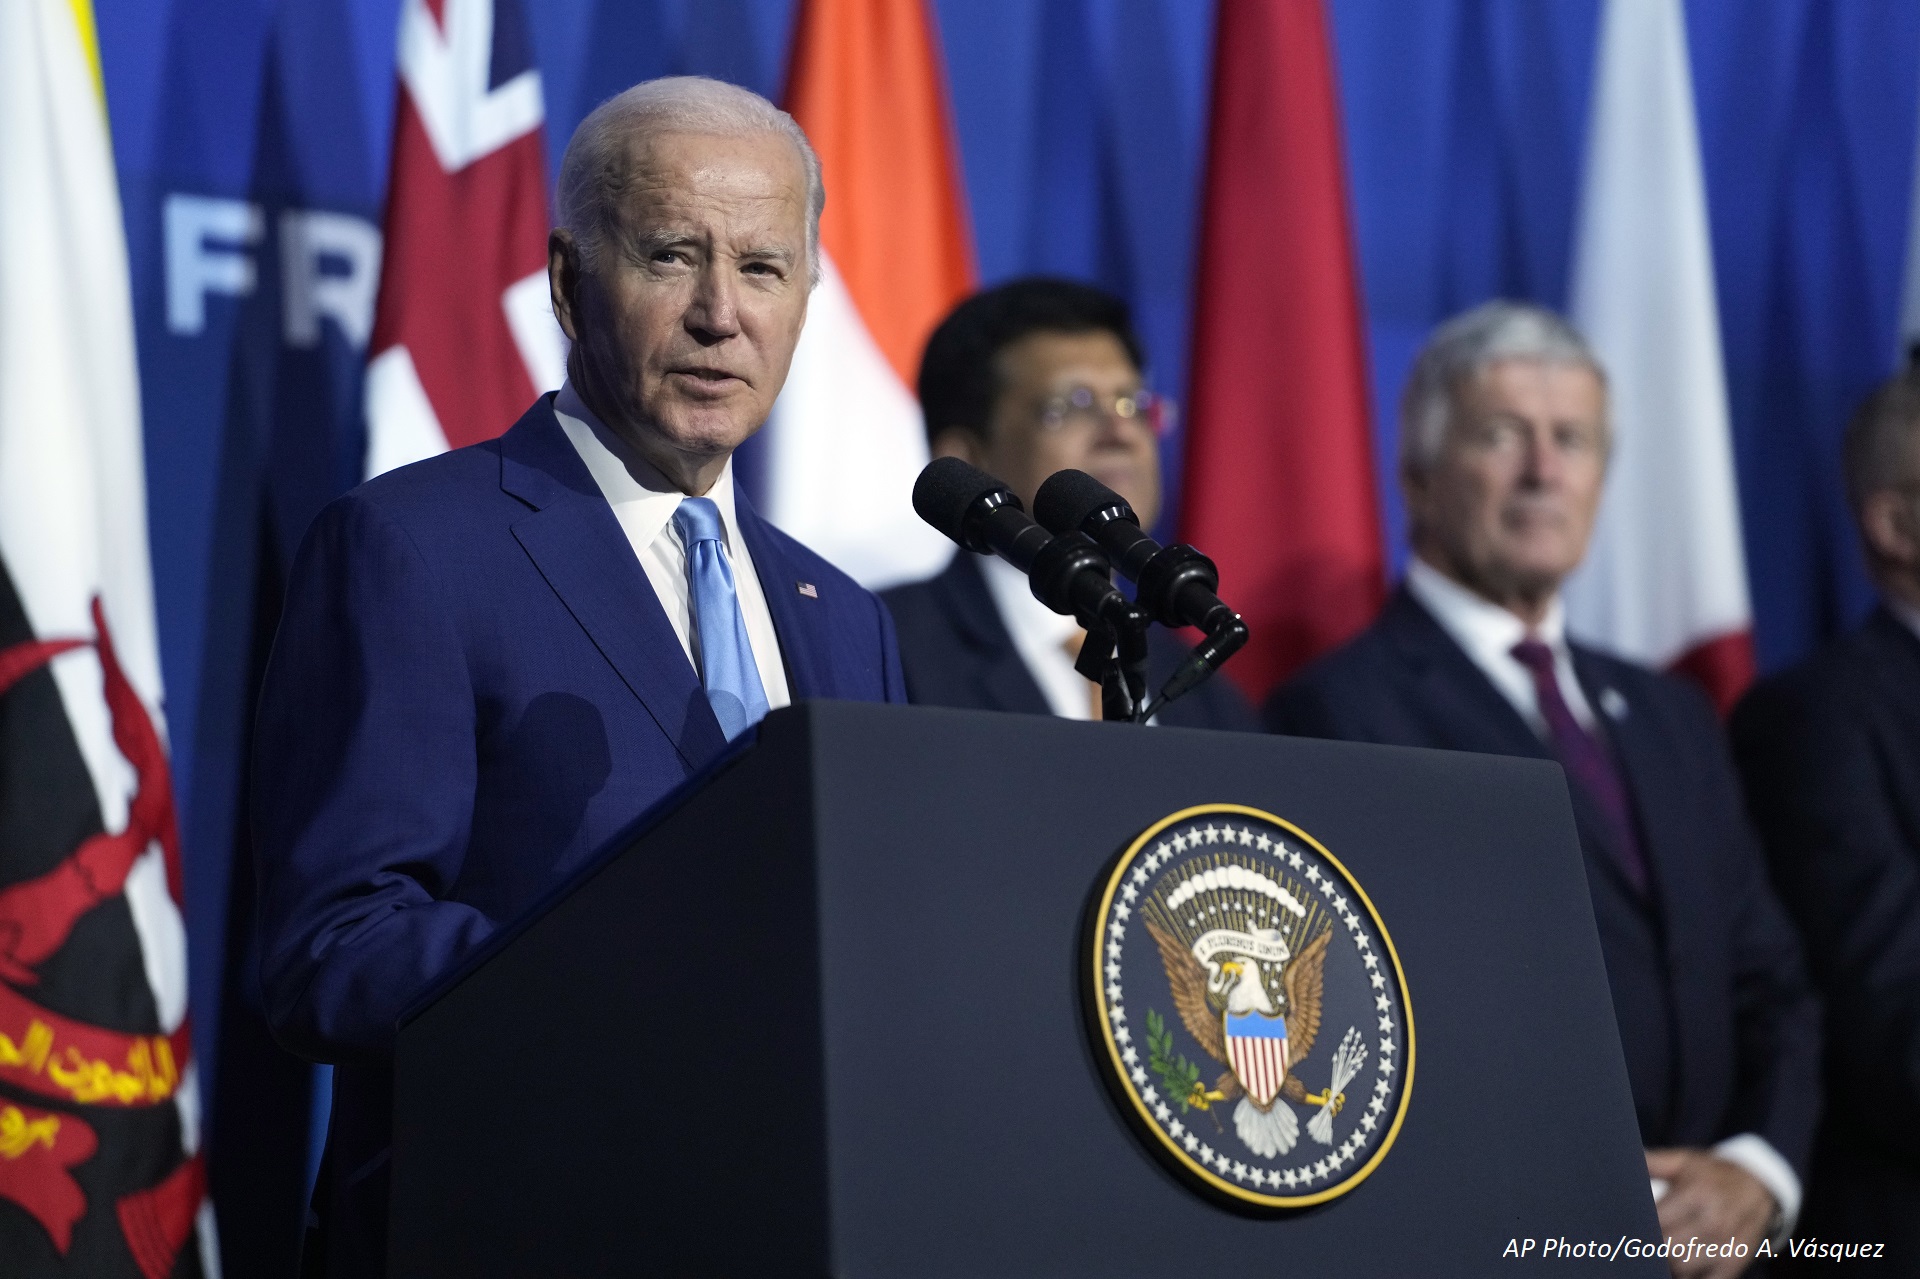 Remarks by President Biden at the Indo-Pacific Economic Framework